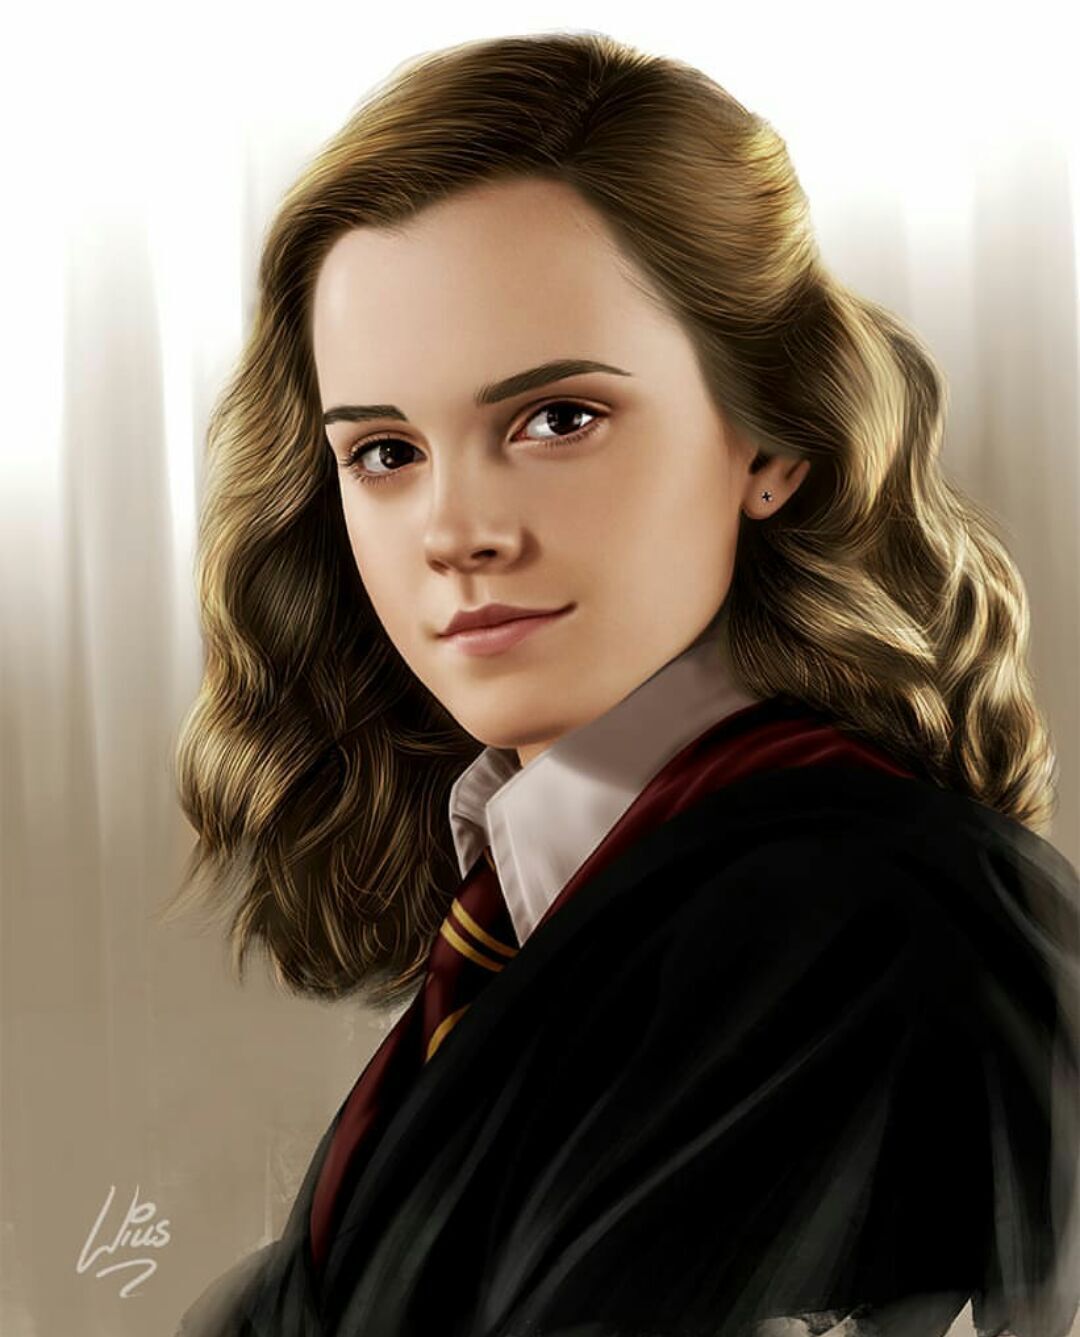 crystal wilbert recommends images of hermione in harry potter pic